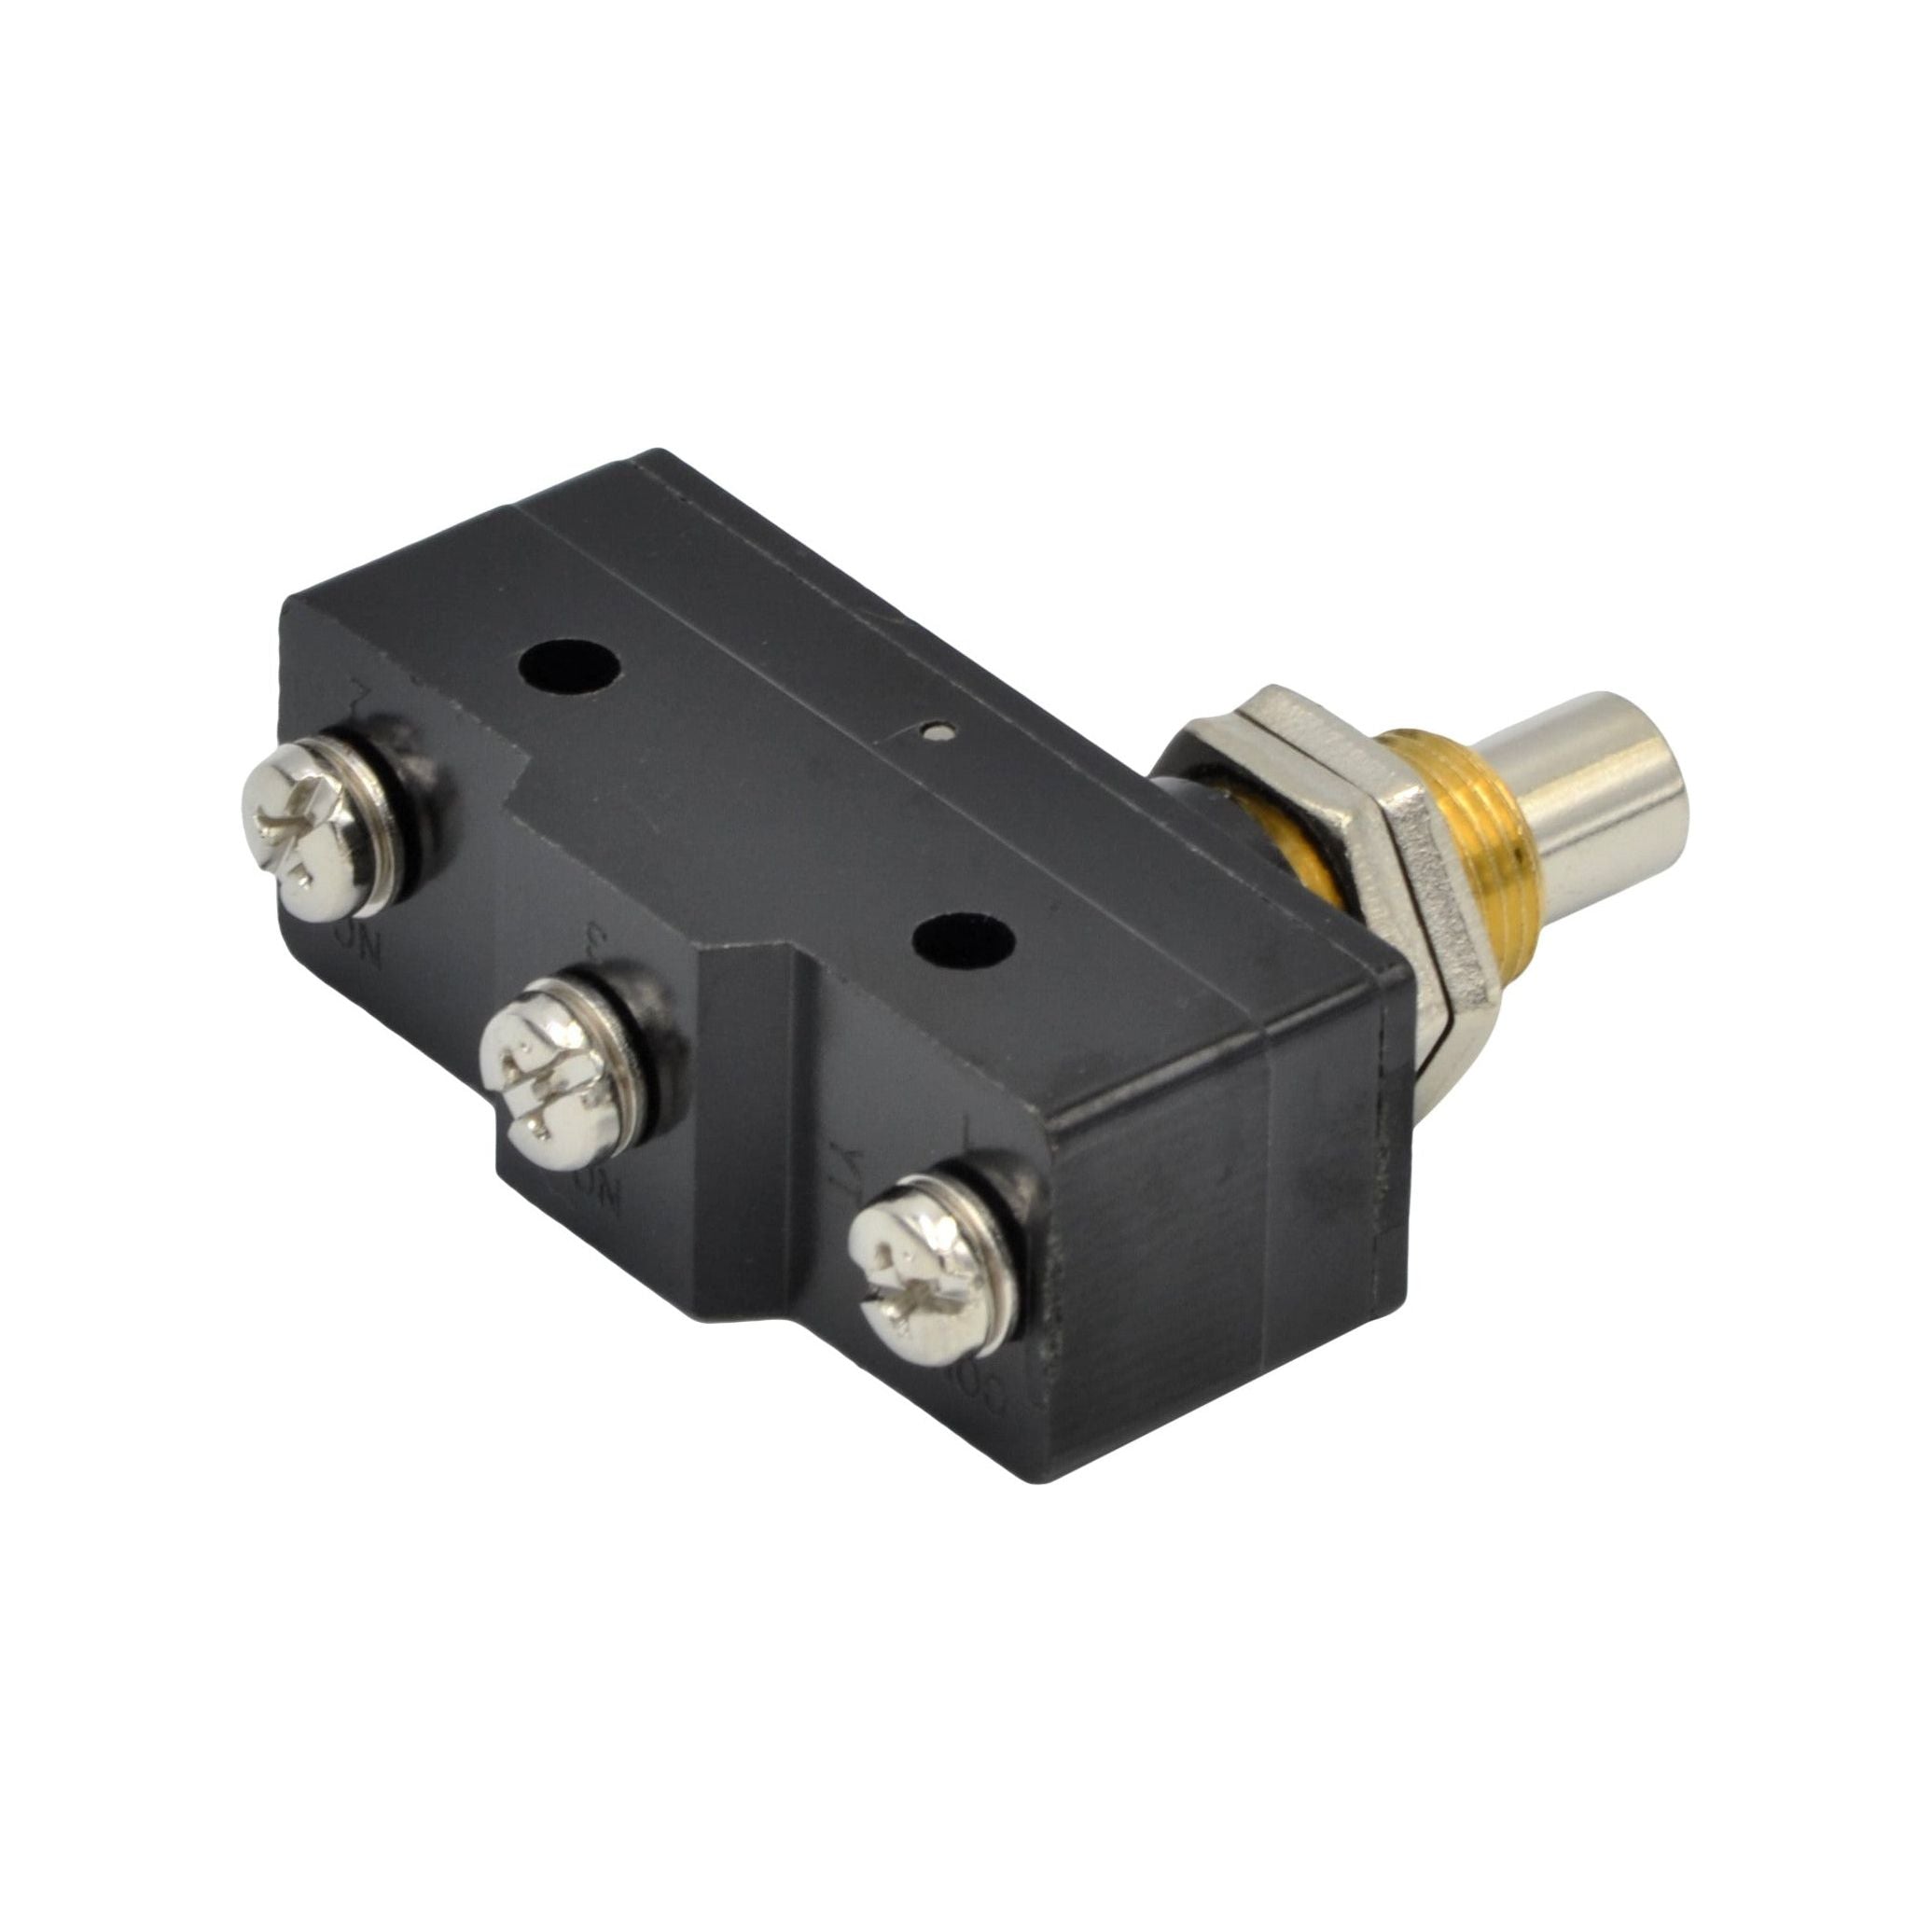 Z-15GQ-B Snap-Action Micro Limit Switch